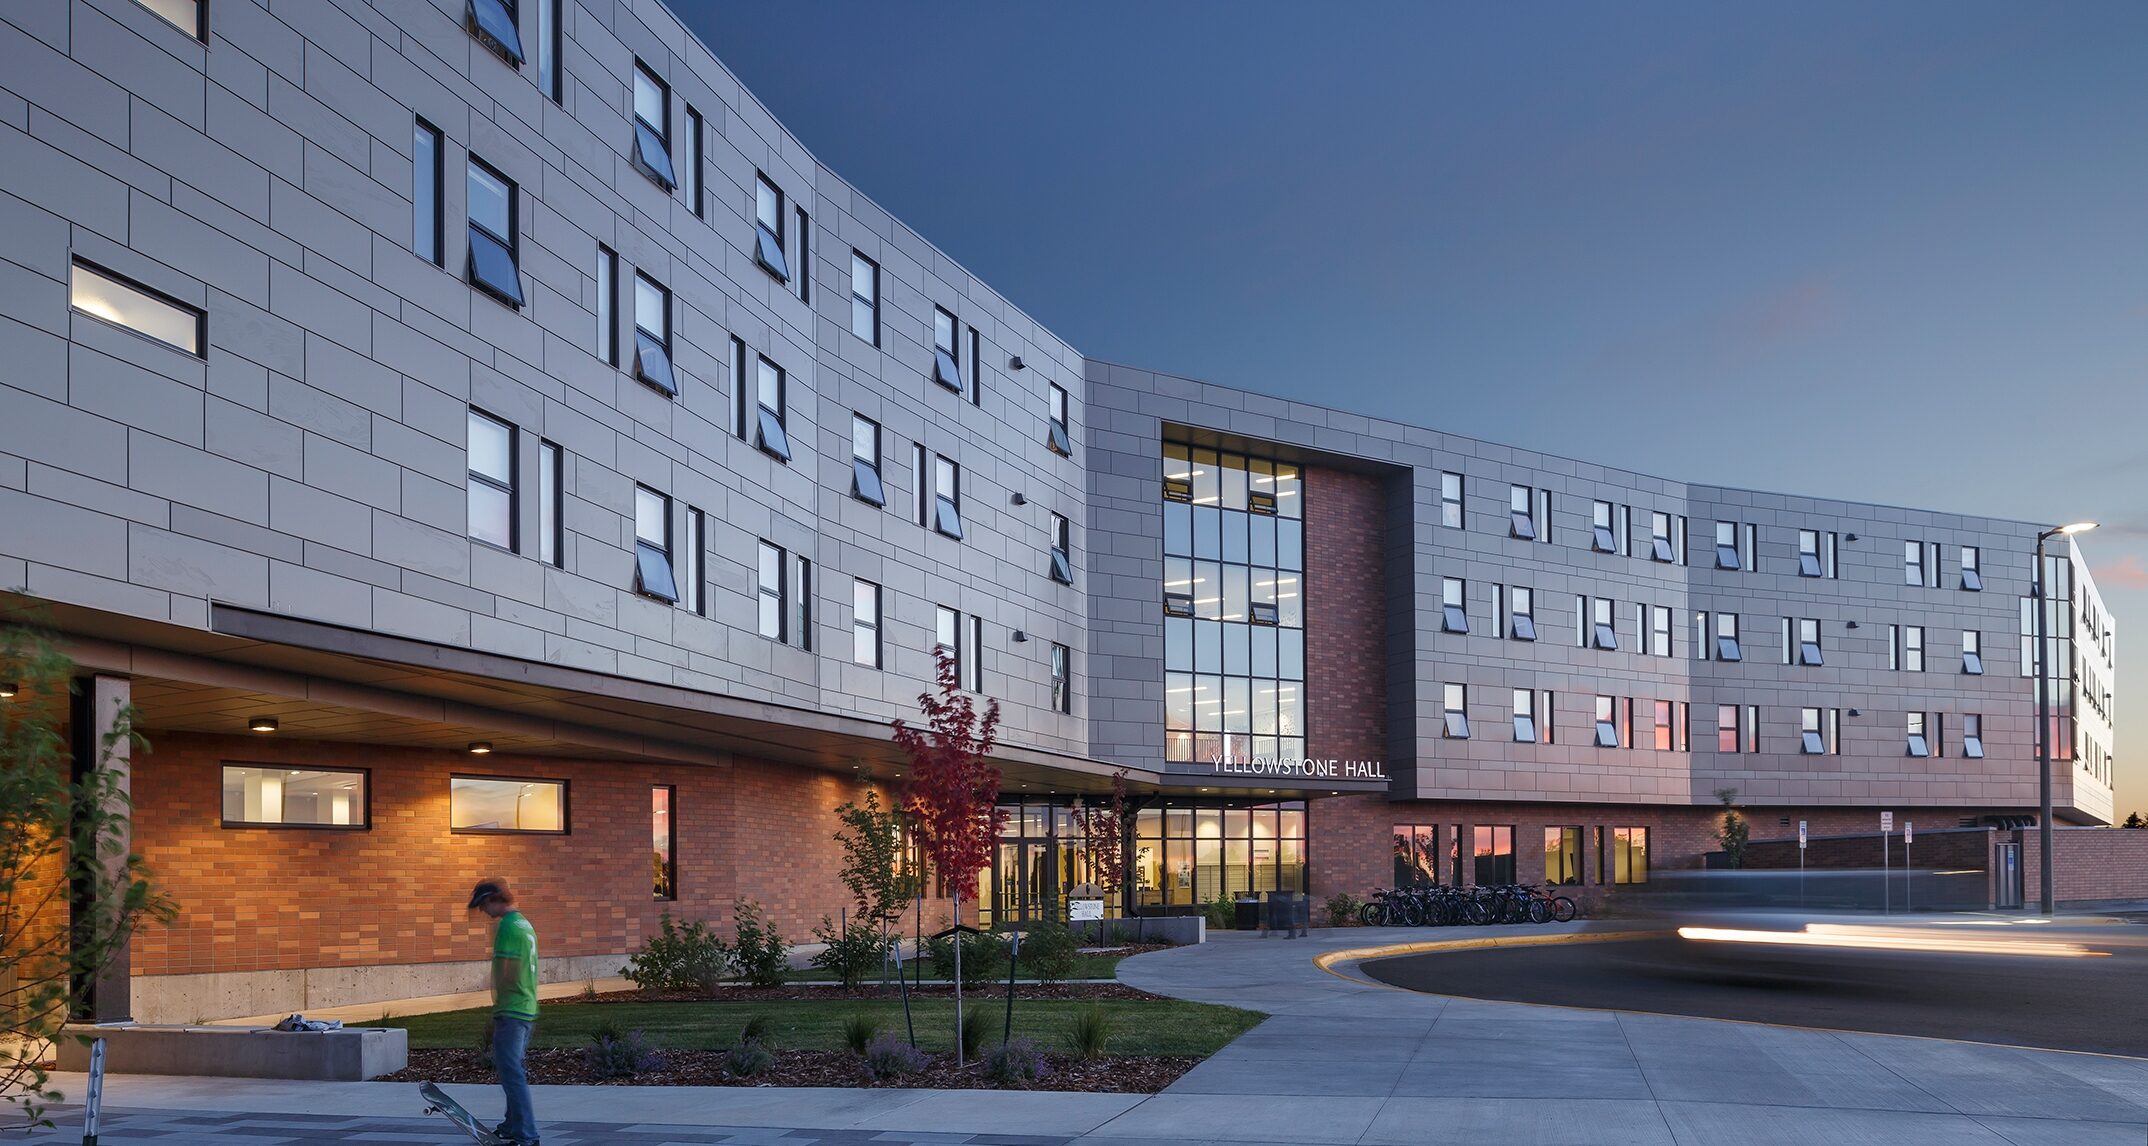 Opened in 2016, MSU's Yellowstone Hall was the first freshman residence facility built on campus in nearly 50 years. For the majority of incoming freshman, this is their first time living away from home; as a result, the design of Yellowstone helps students connect and build a community of peers.